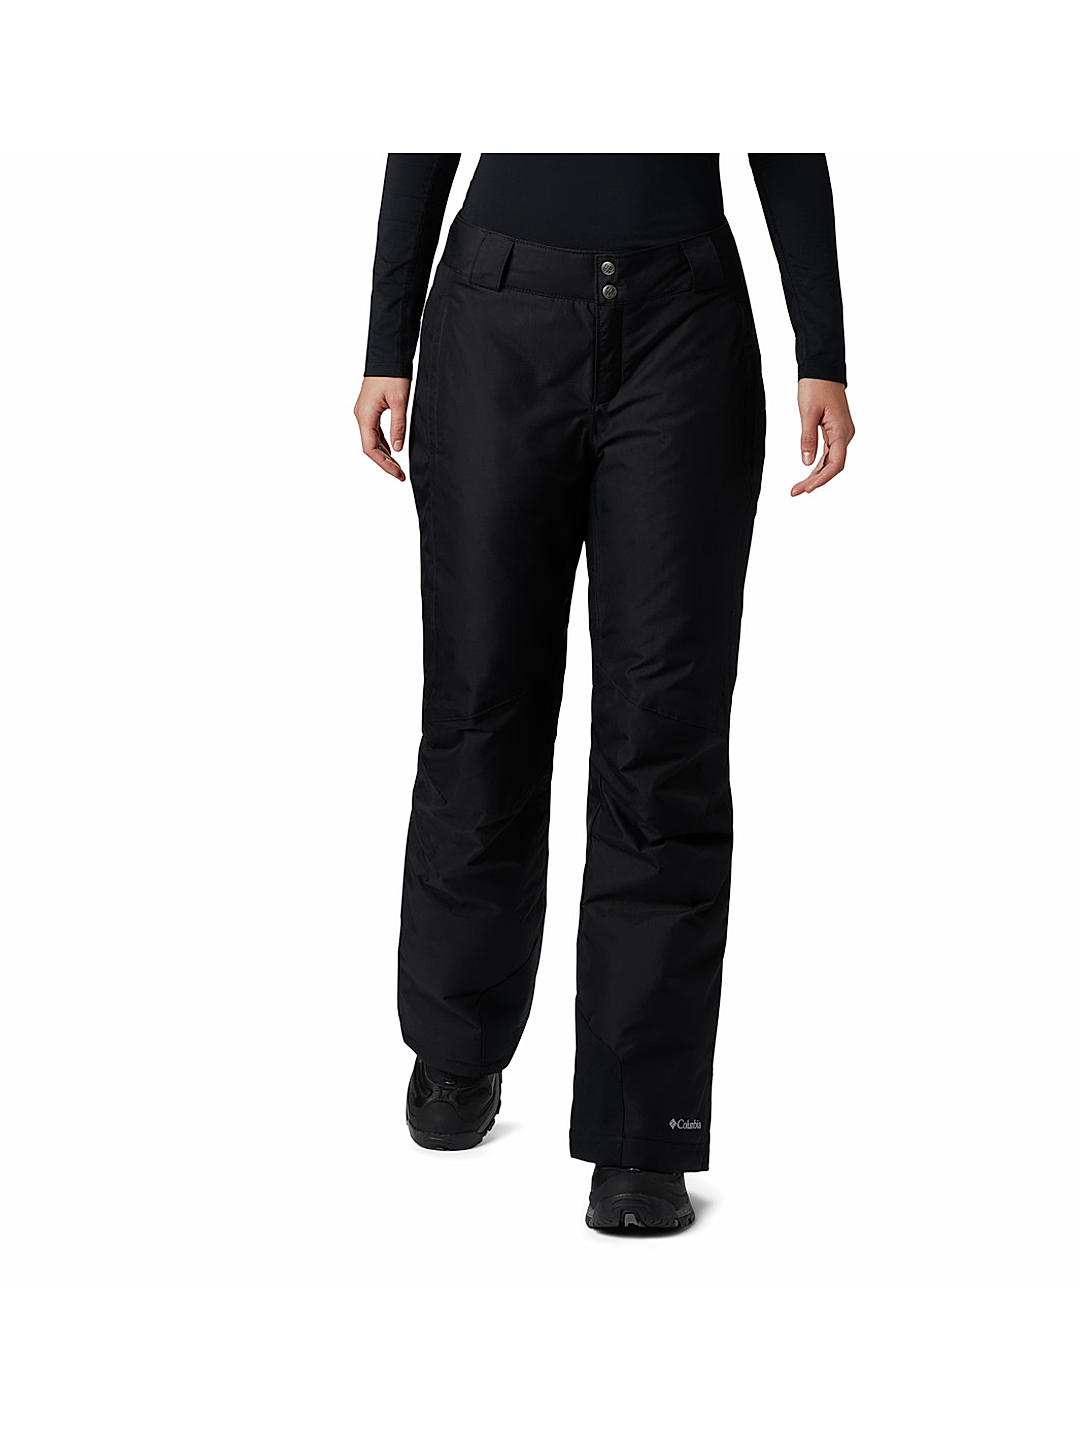 Buy Black Bugaboo Oh Pant for Women Online at Columbia Sportswear  488361